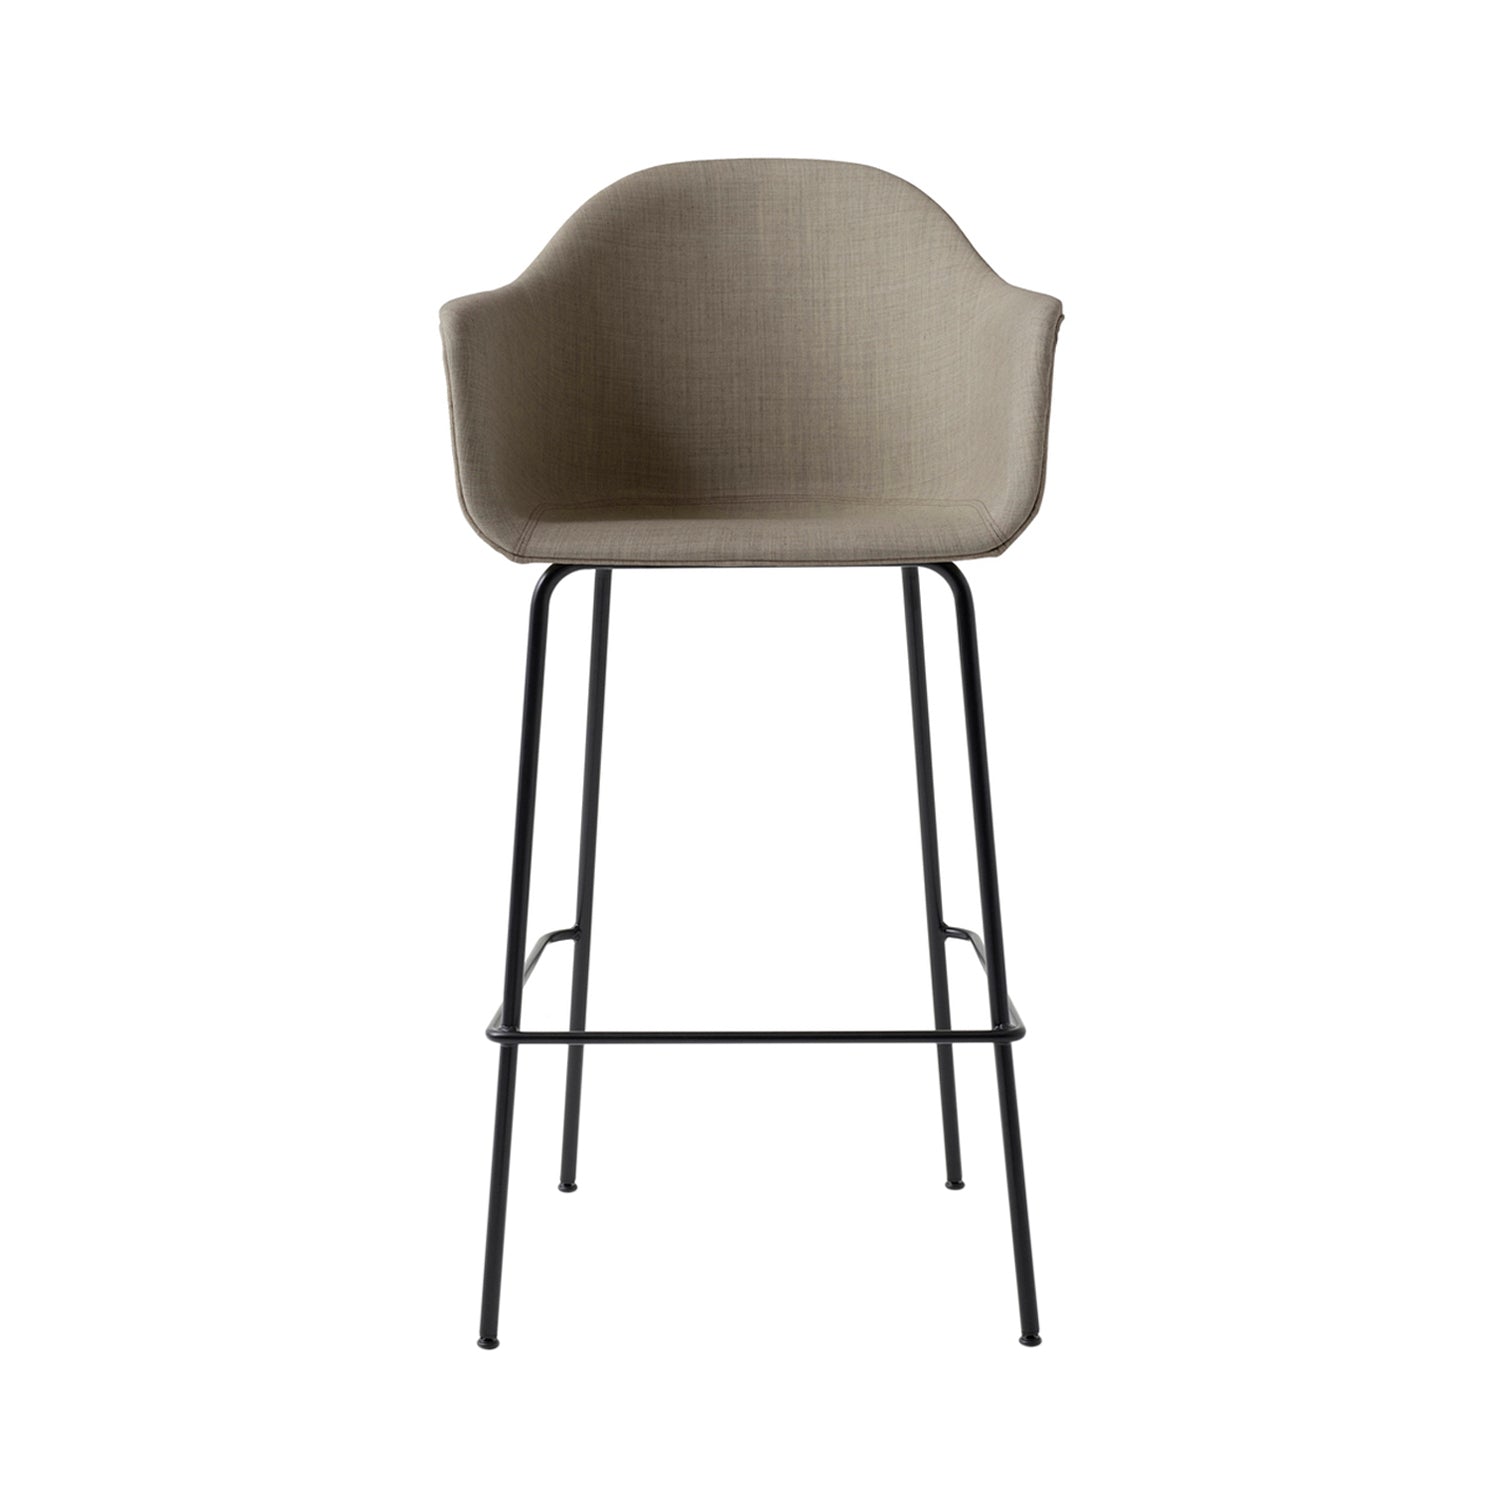 Harbour Bar + Counter Chair: Steel Base Upholstered + Bar + Remix3 233